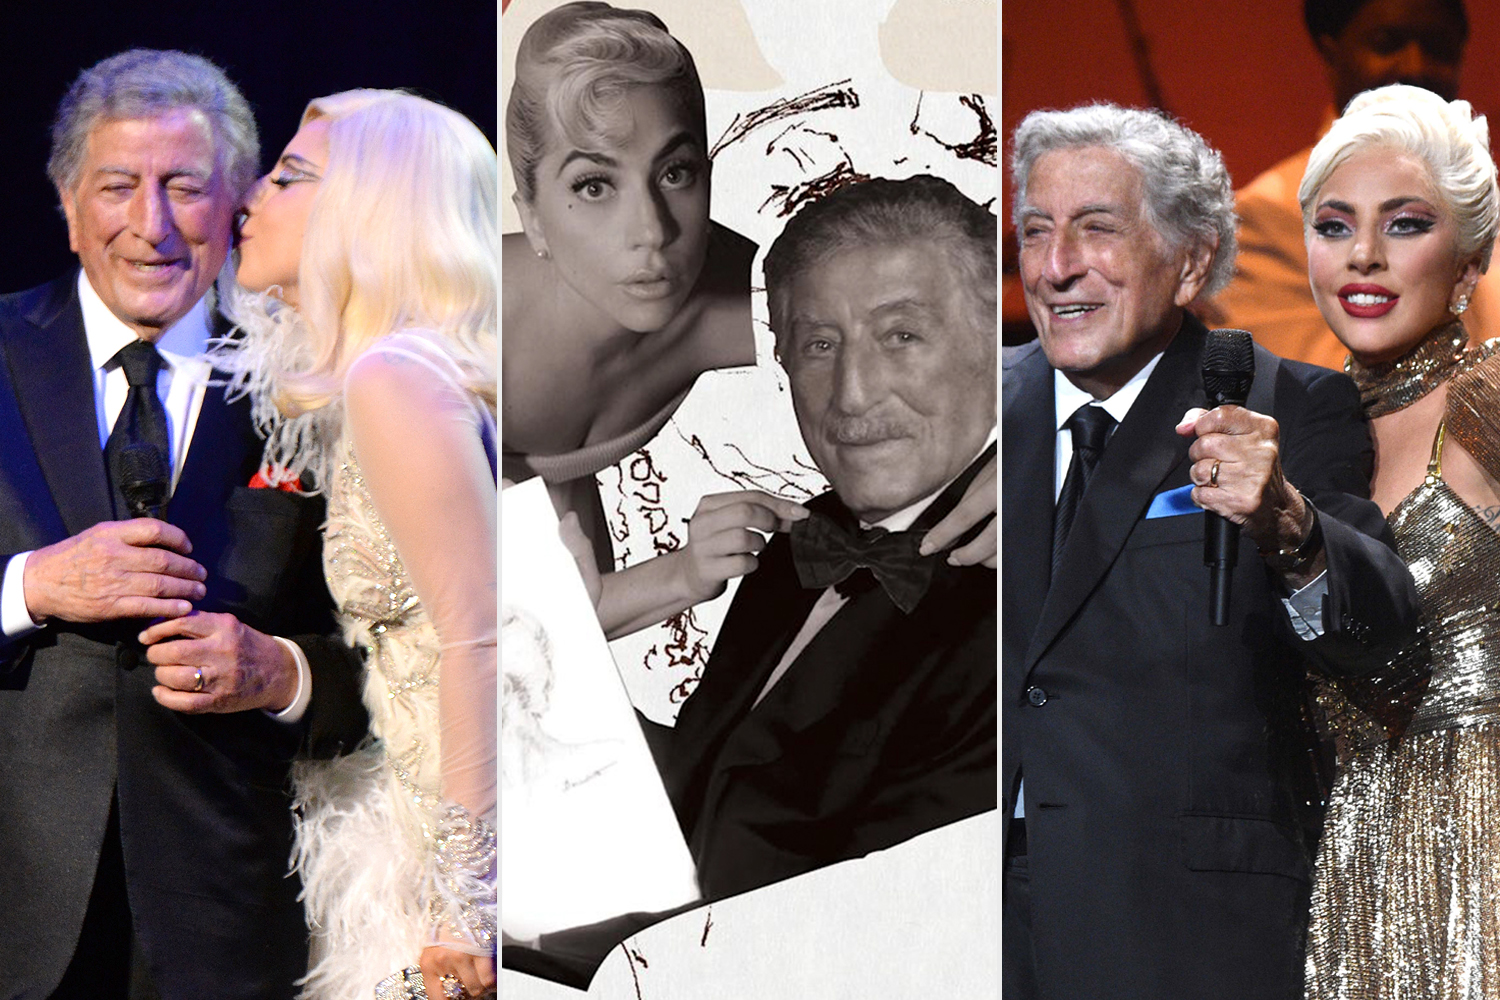 Lady Gaga and Tony Bennett perform onstage in support of their award winning album "Cheek To Cheek"; Lady Gaga and Tony Bennett Love For Sale; "One Last Time: An Evening With Tony Bennett and Lady Gaga"